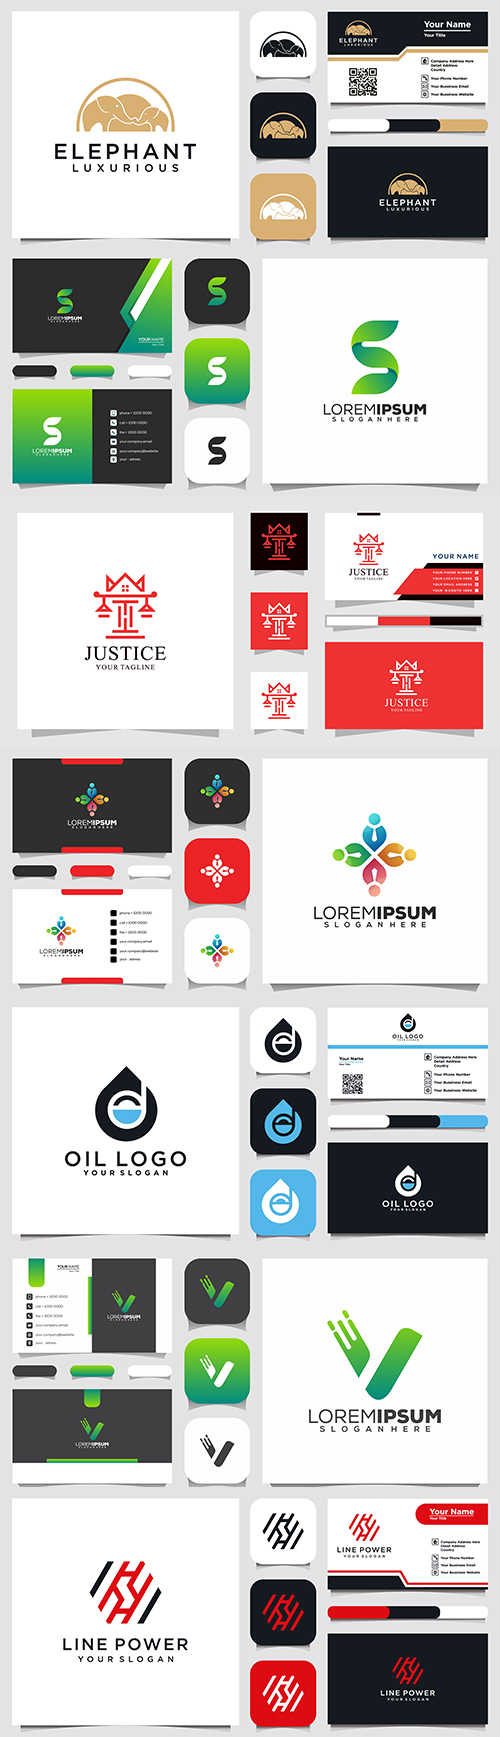 Company logo, badge and business card design
